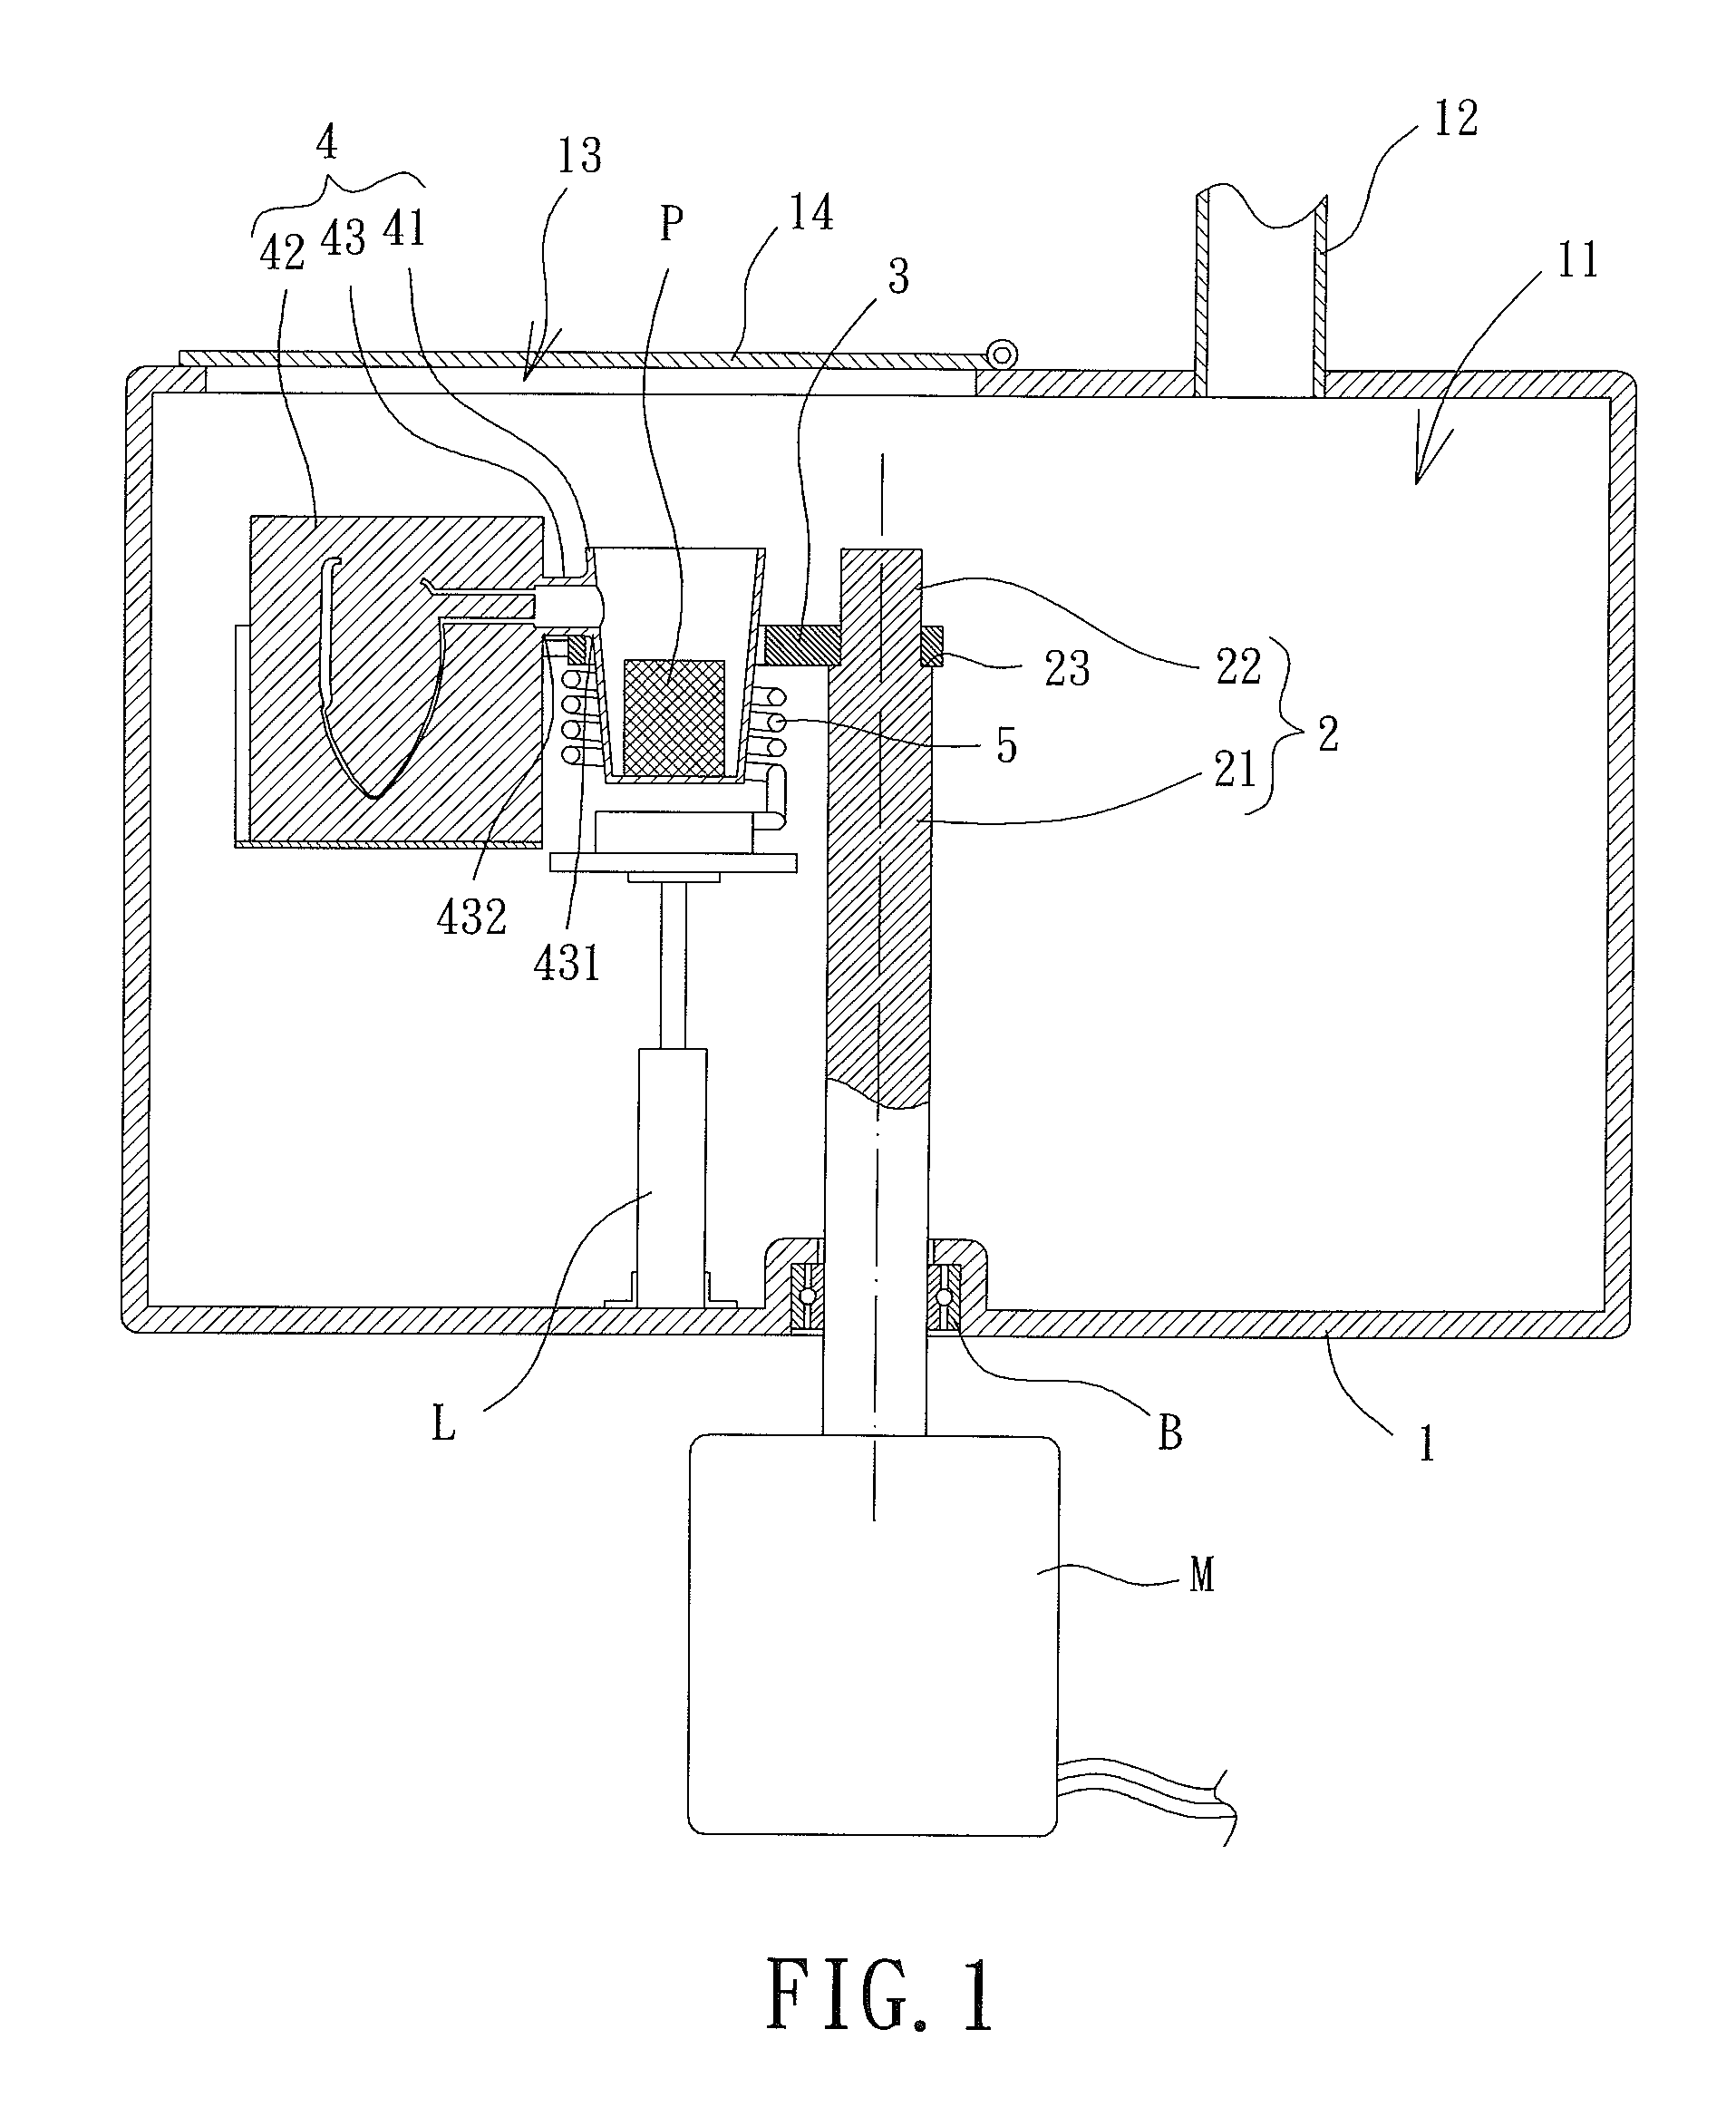 Method for Manufacturing a Low-Density Steel Wooden Golf Head